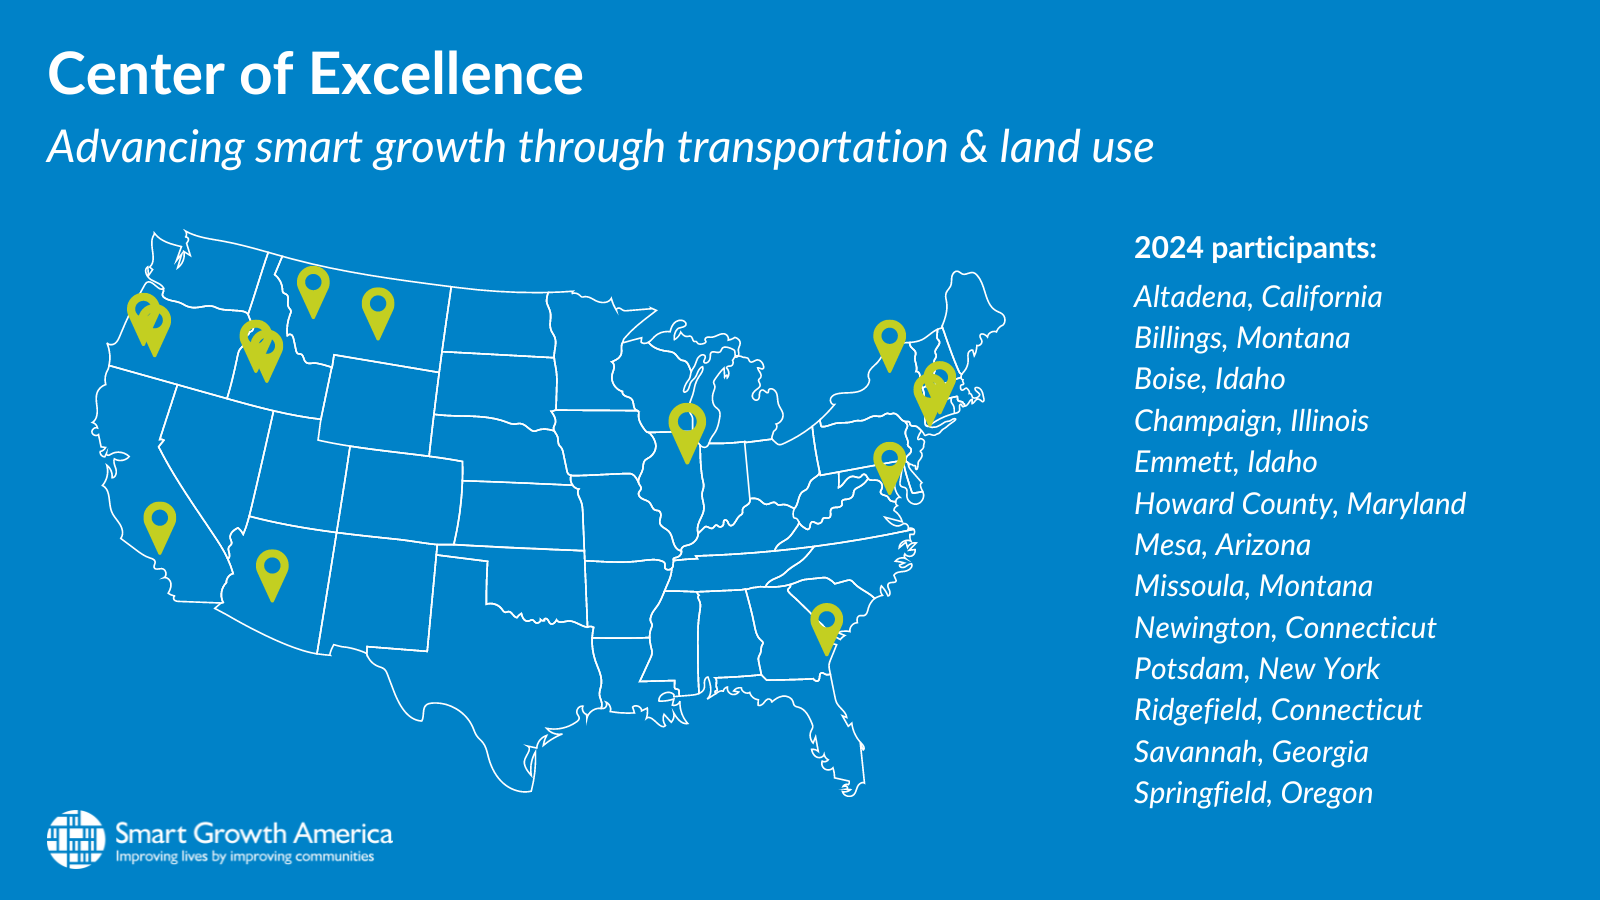 The Center of Excellence: Advancing smart growth through transportation & land use